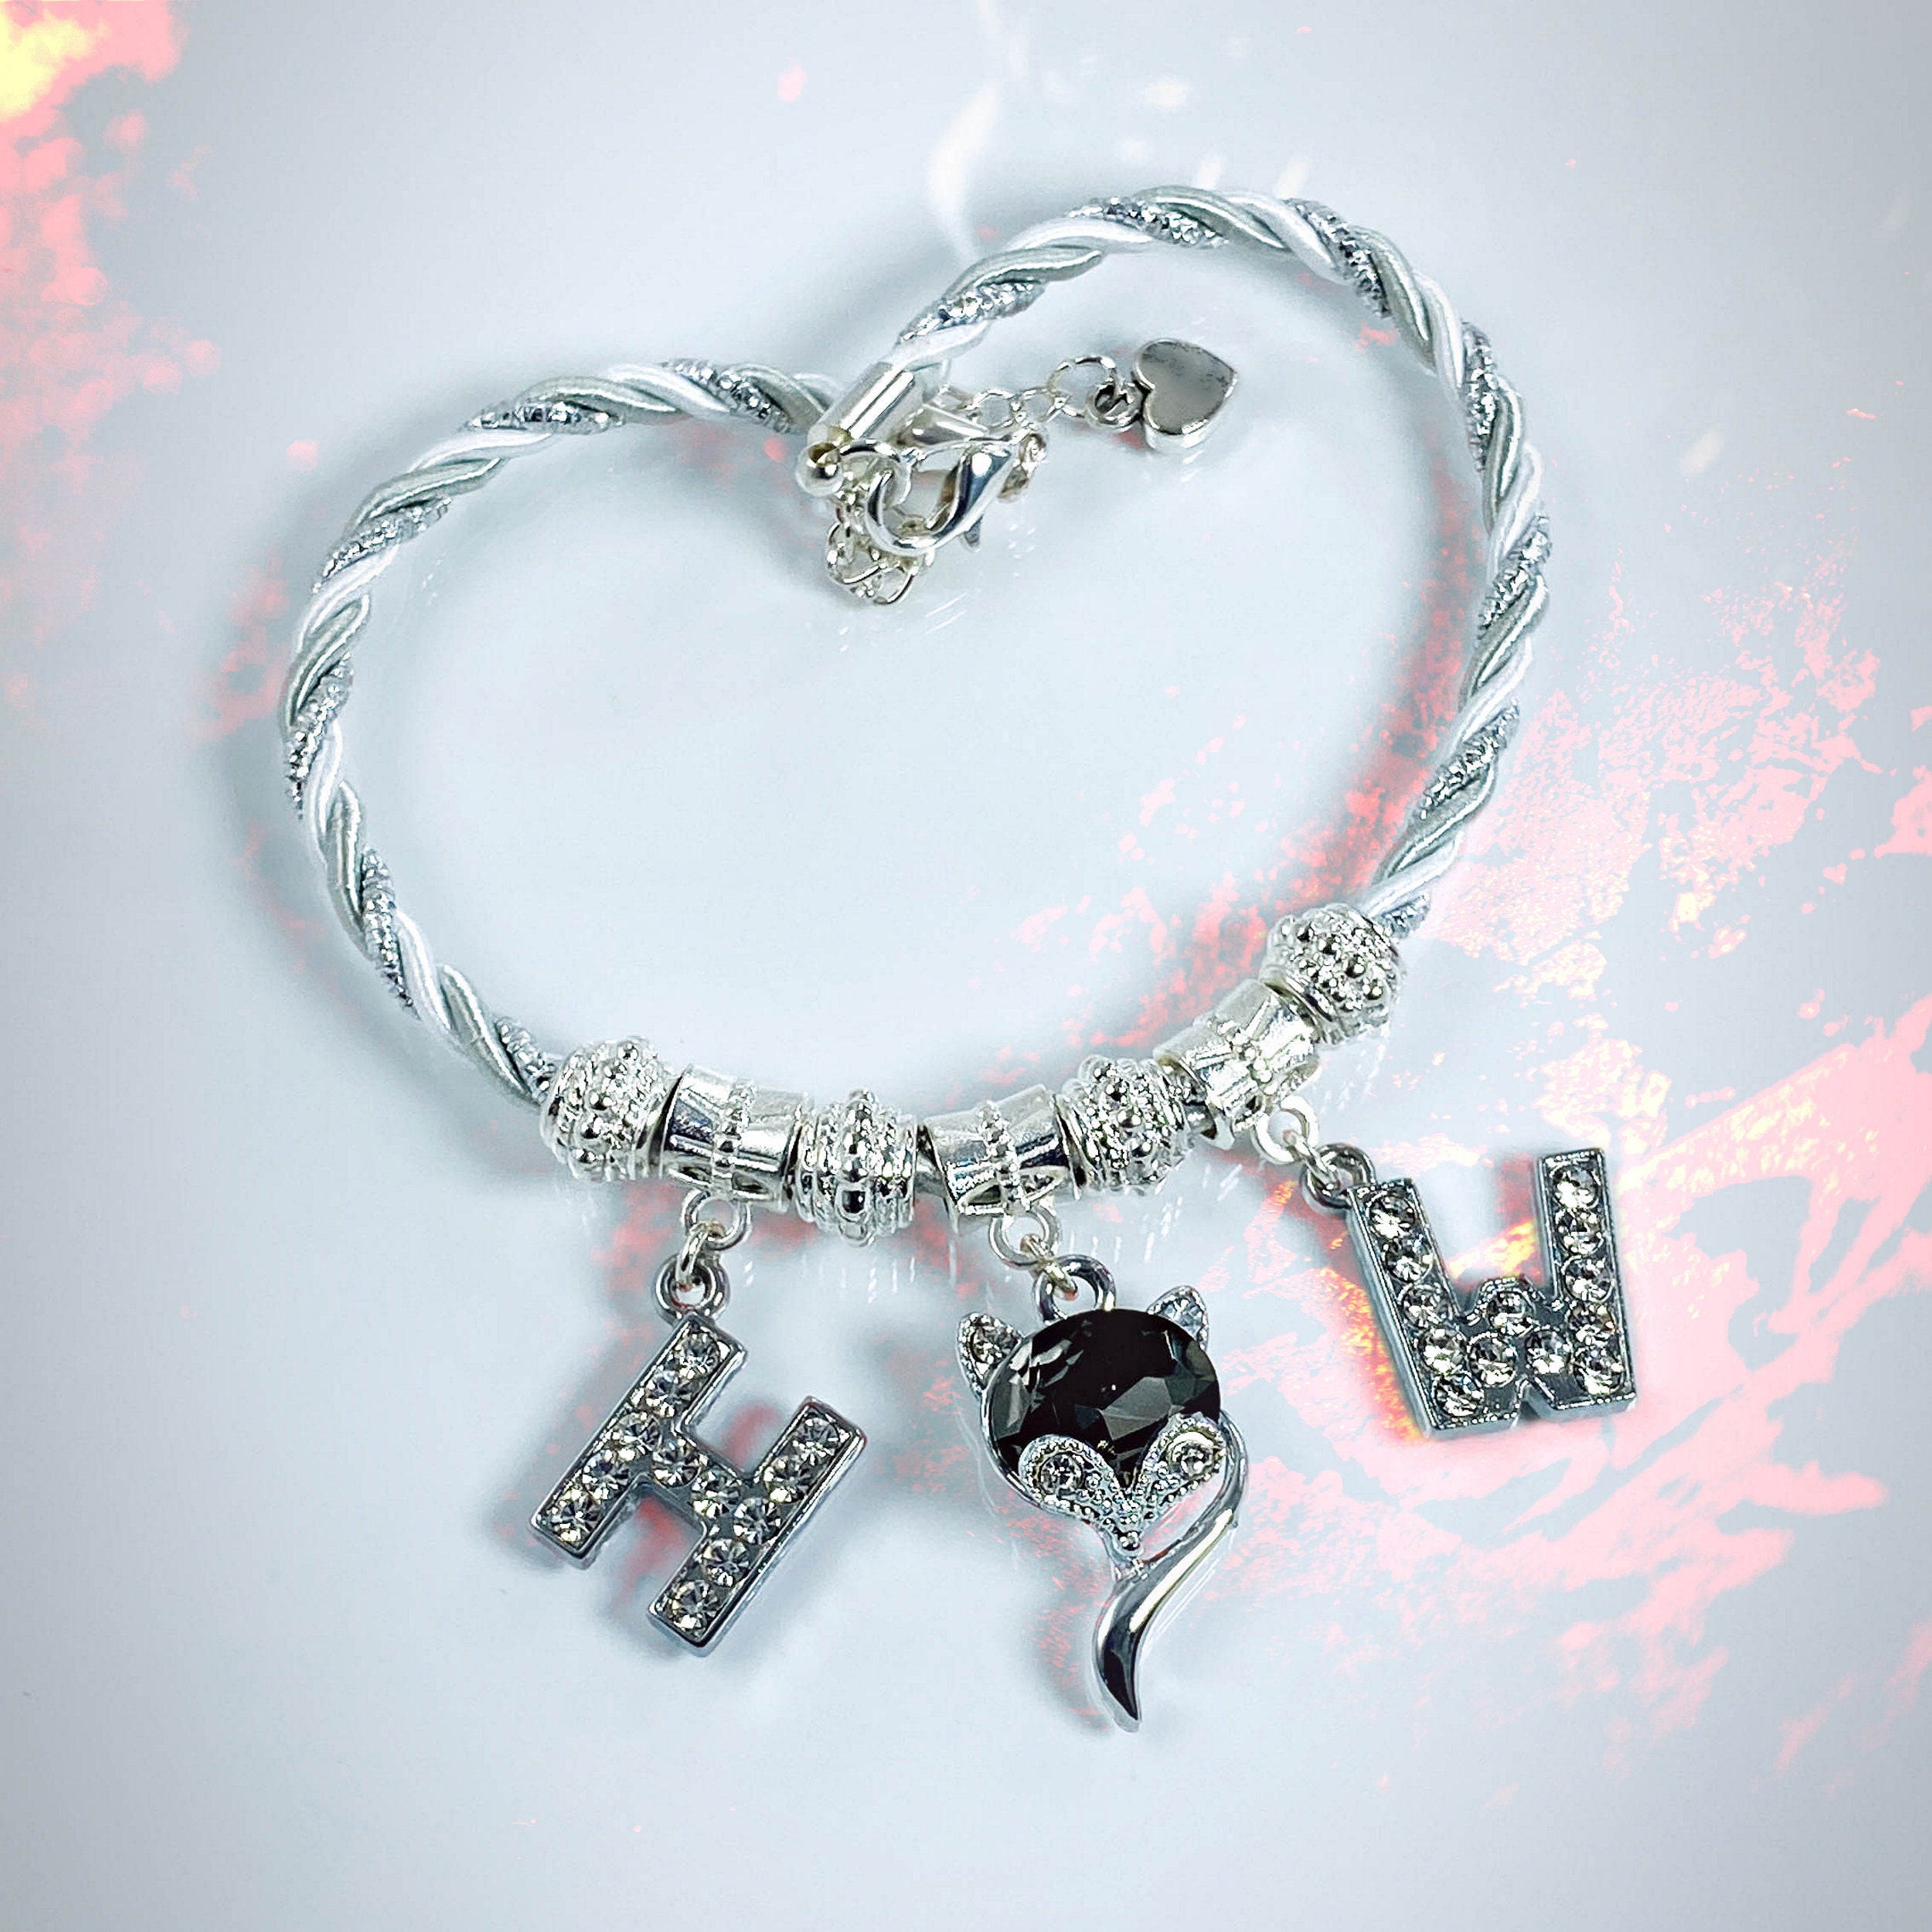 Hotwife Silk Anklet With Rhinestone Letters and Vixen Charm